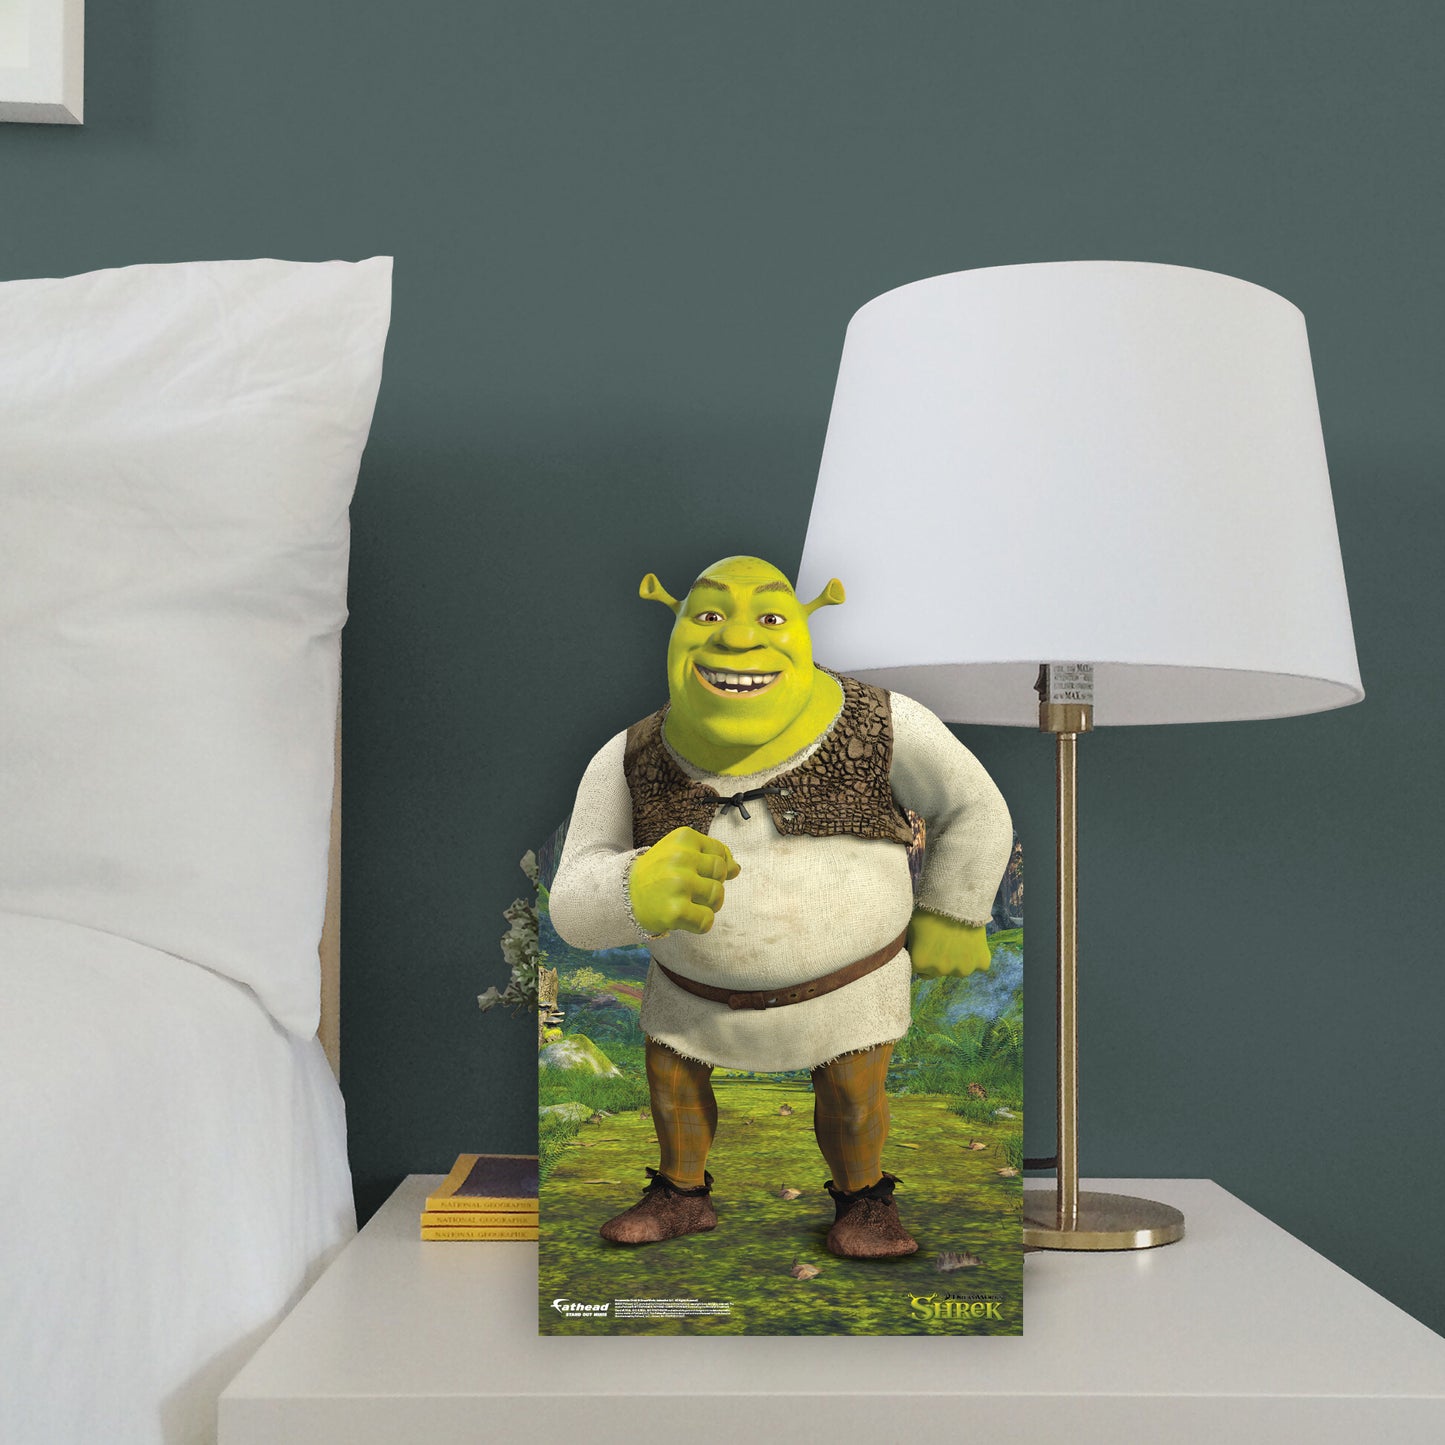 Shrek: Shrek Mini   Cardstock Cutout  - Officially Licensed NBC Universal    Stand Out